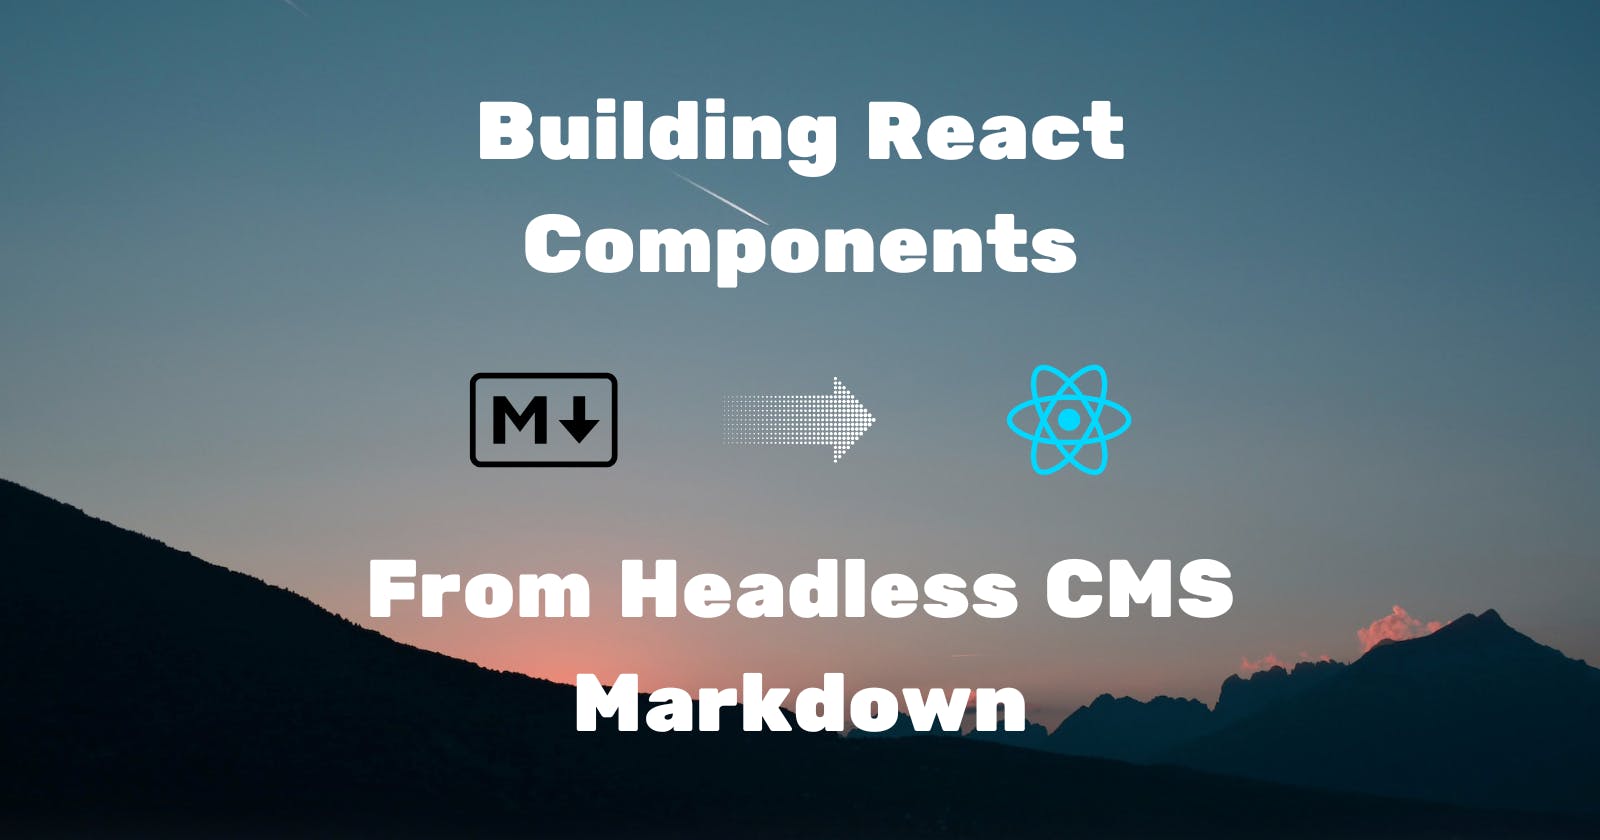 Building React Components from headless CMS markdown